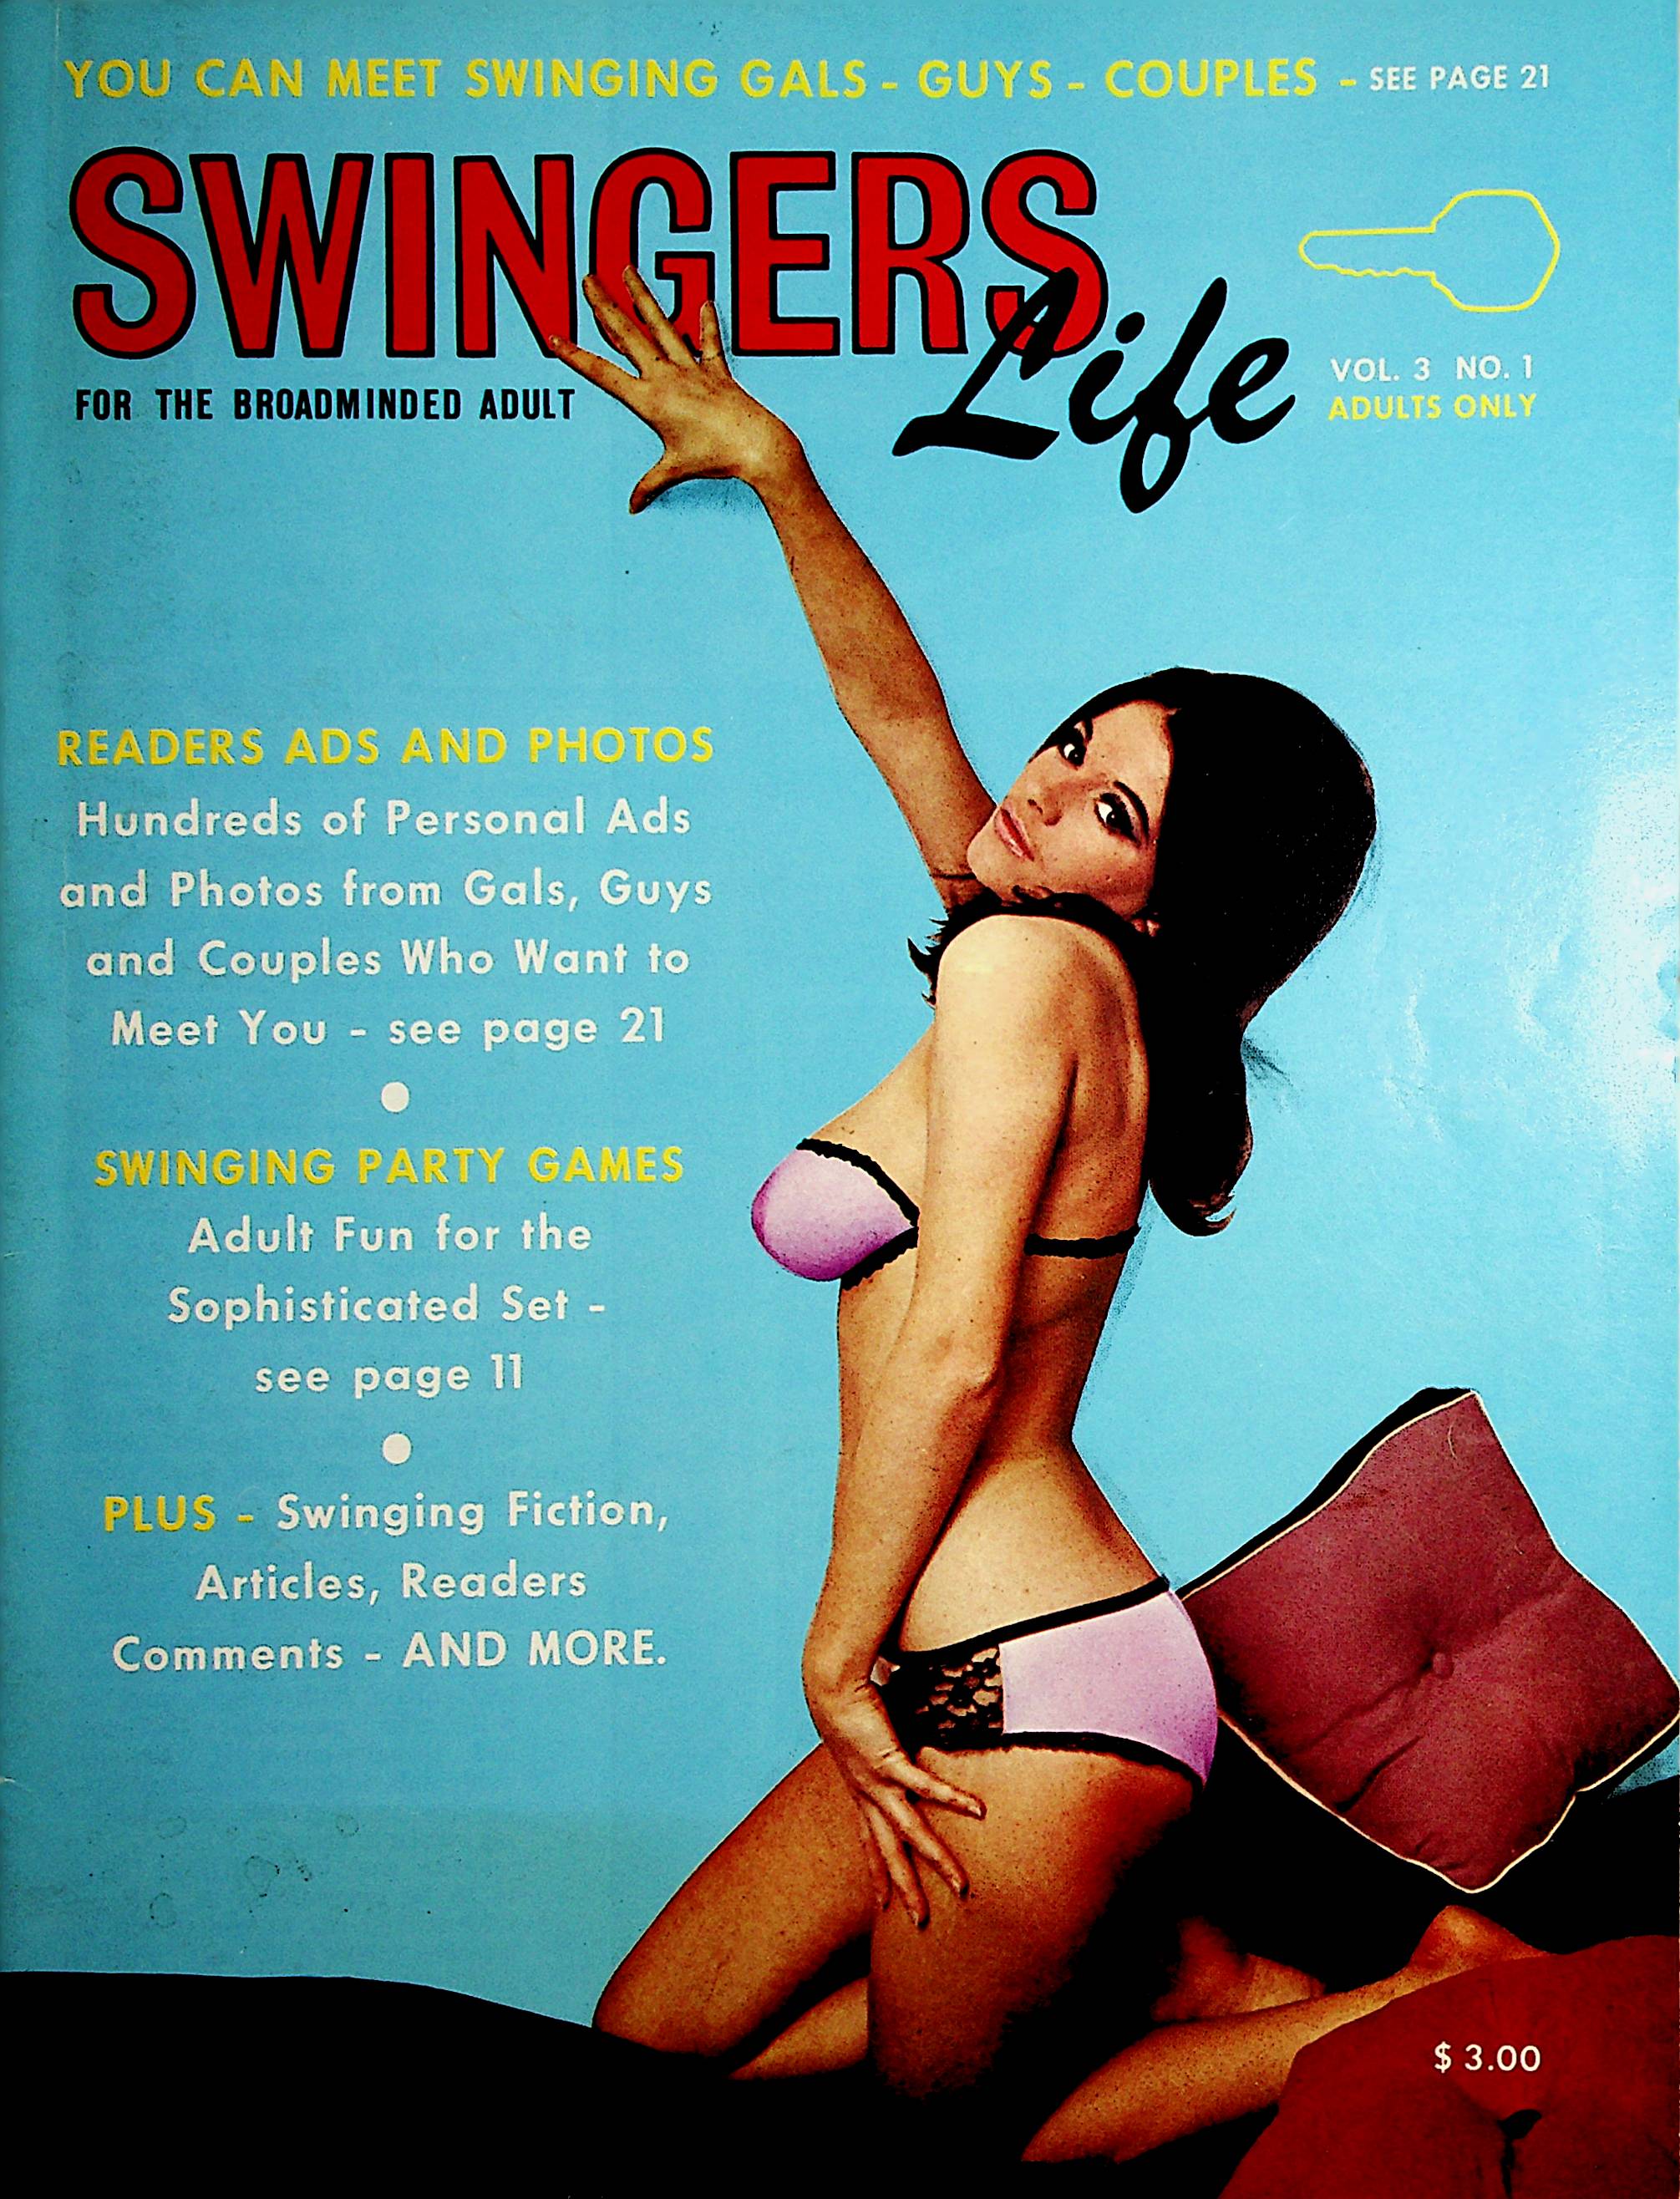 Swingers Life Vintage Contact Magazine Swinging Games vol.3 #1 1968 09 image picture